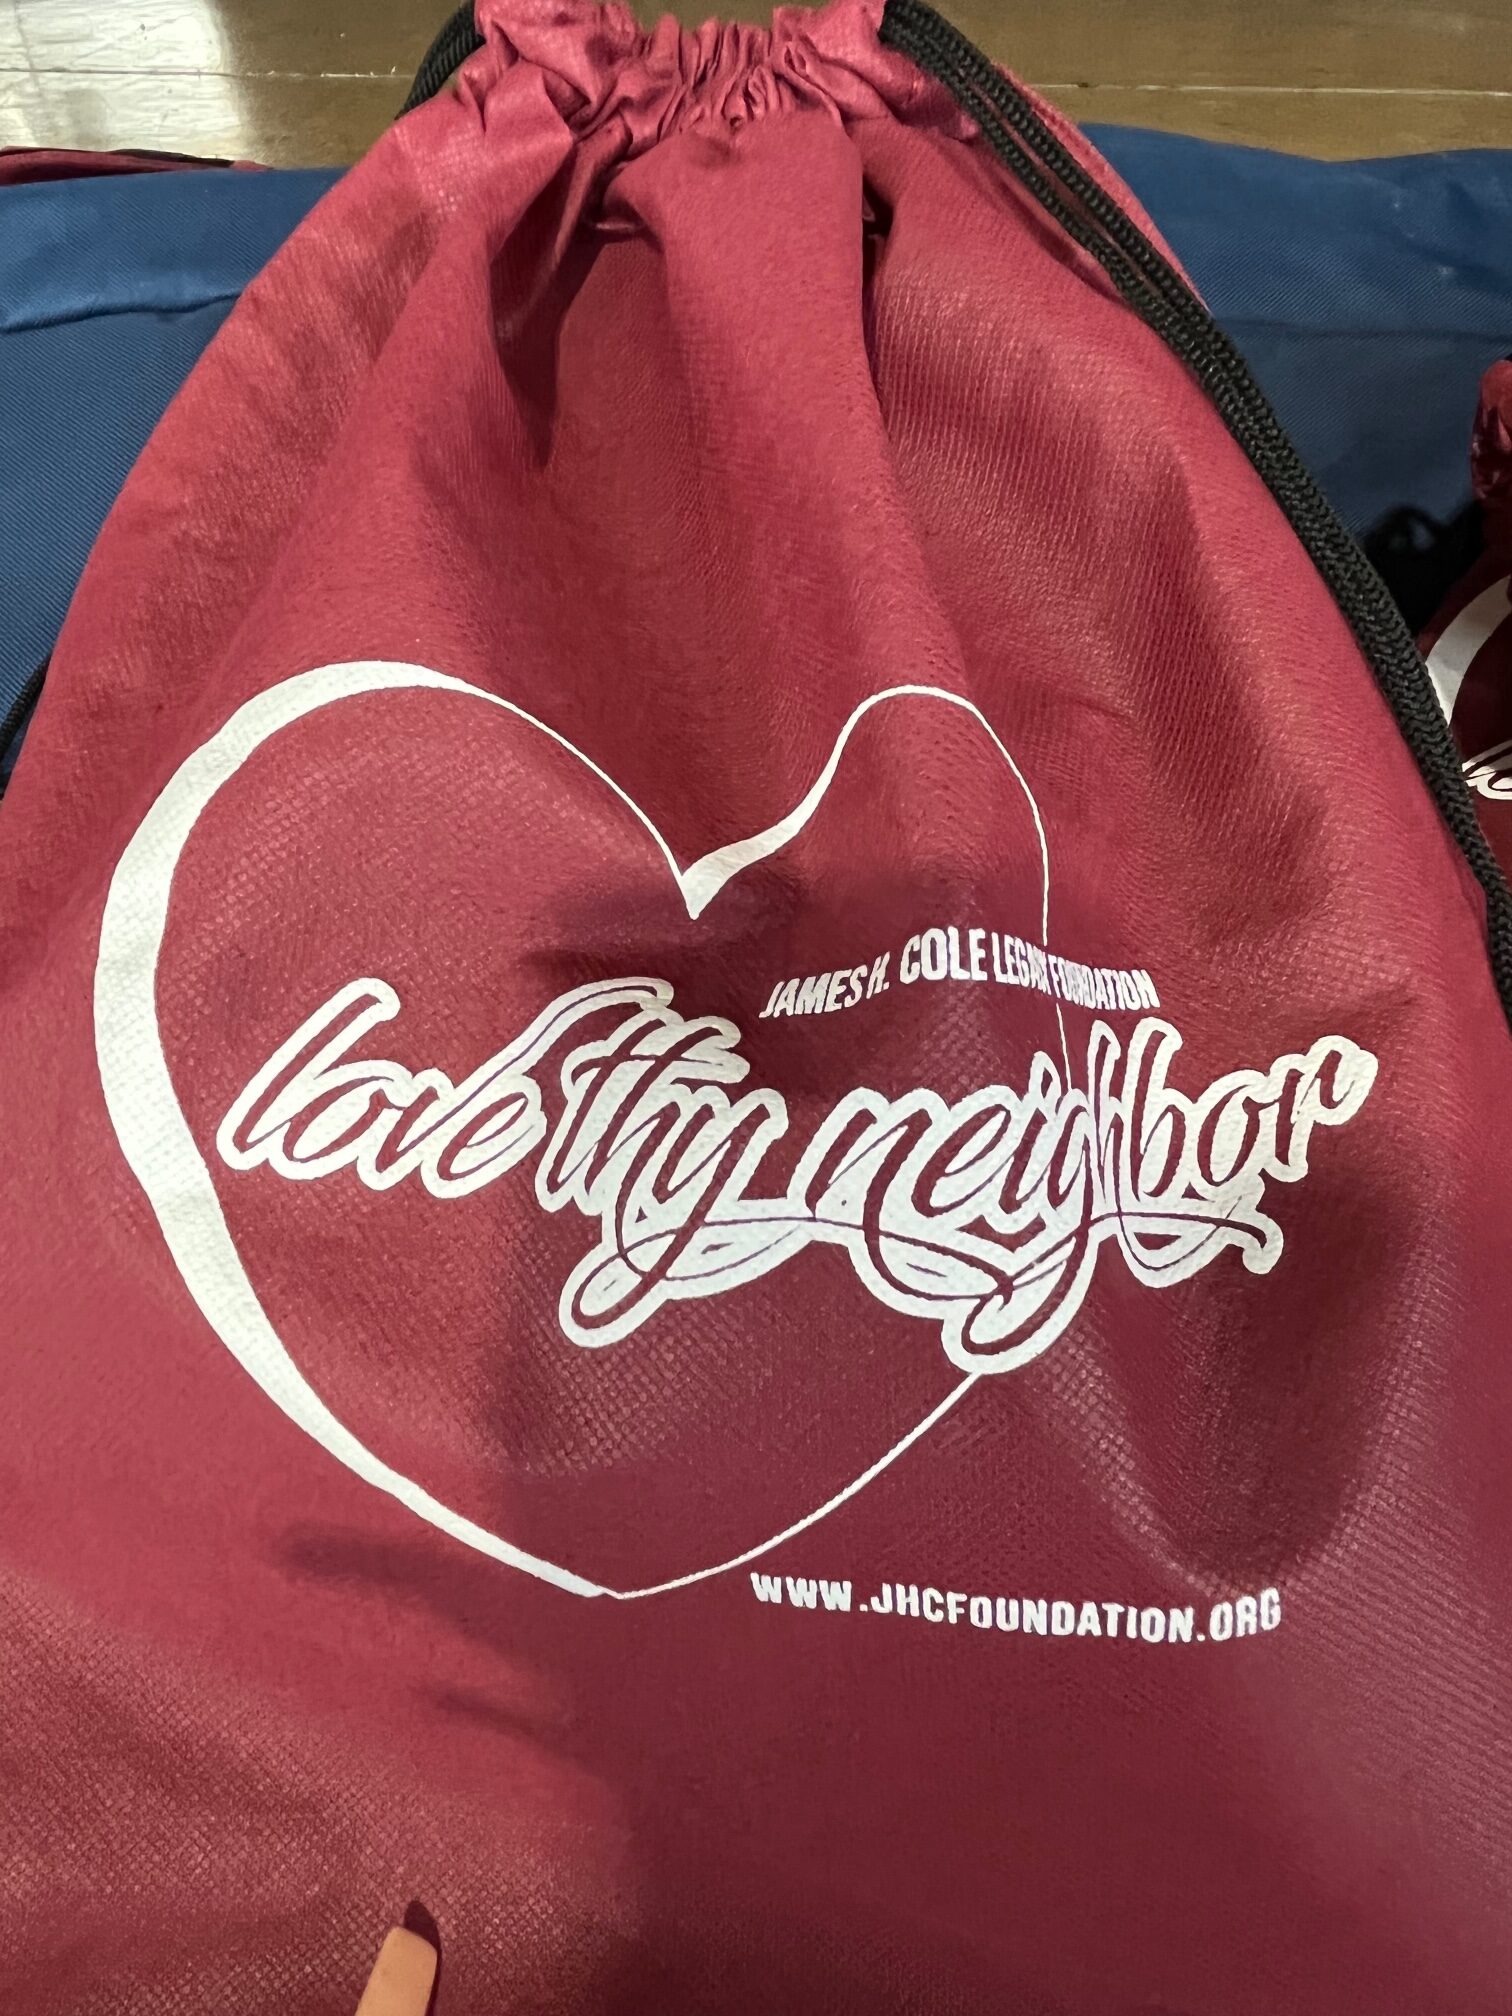 James Cole Foundation, Love Thy Neighbor backpack at Commonwealth event